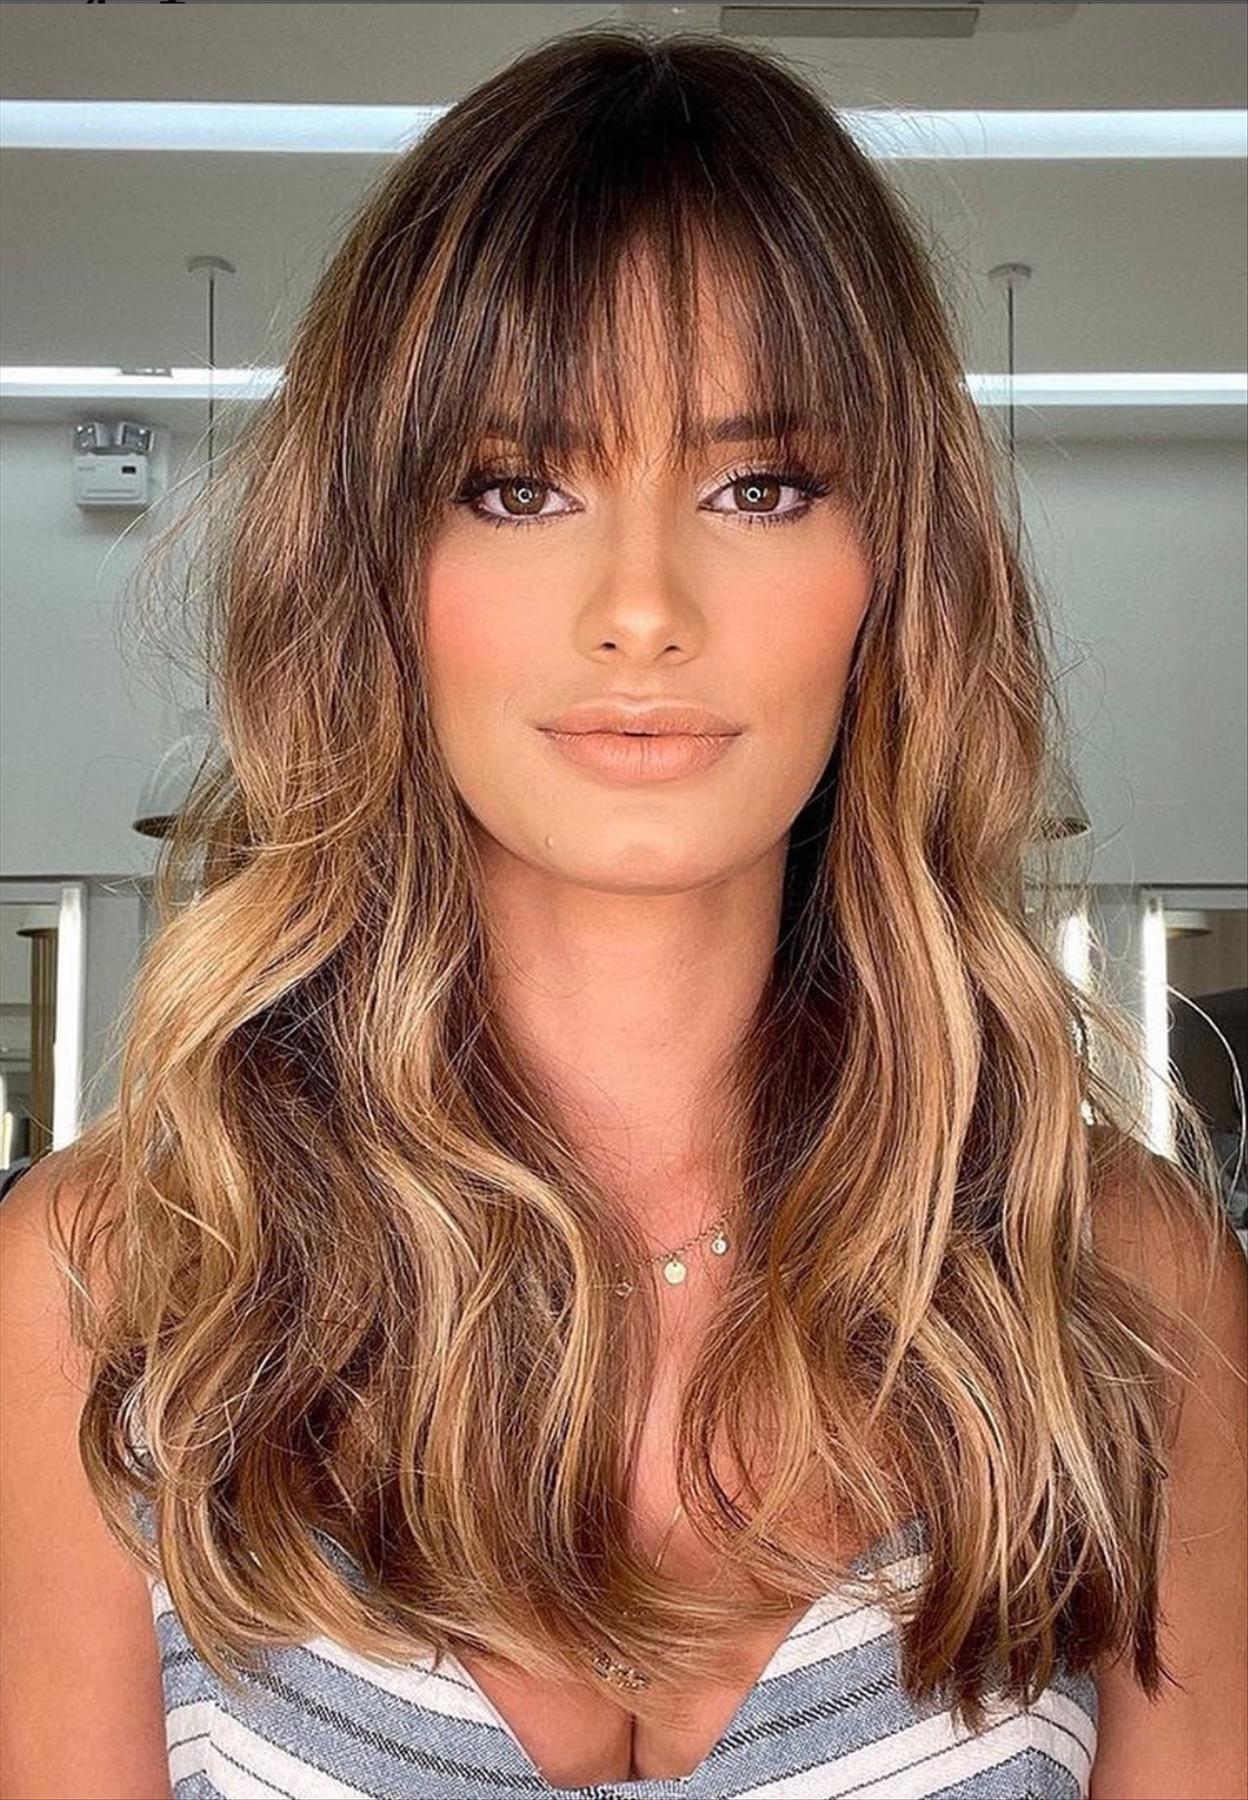 Trendy hairstyles with bangs and layers you'll love